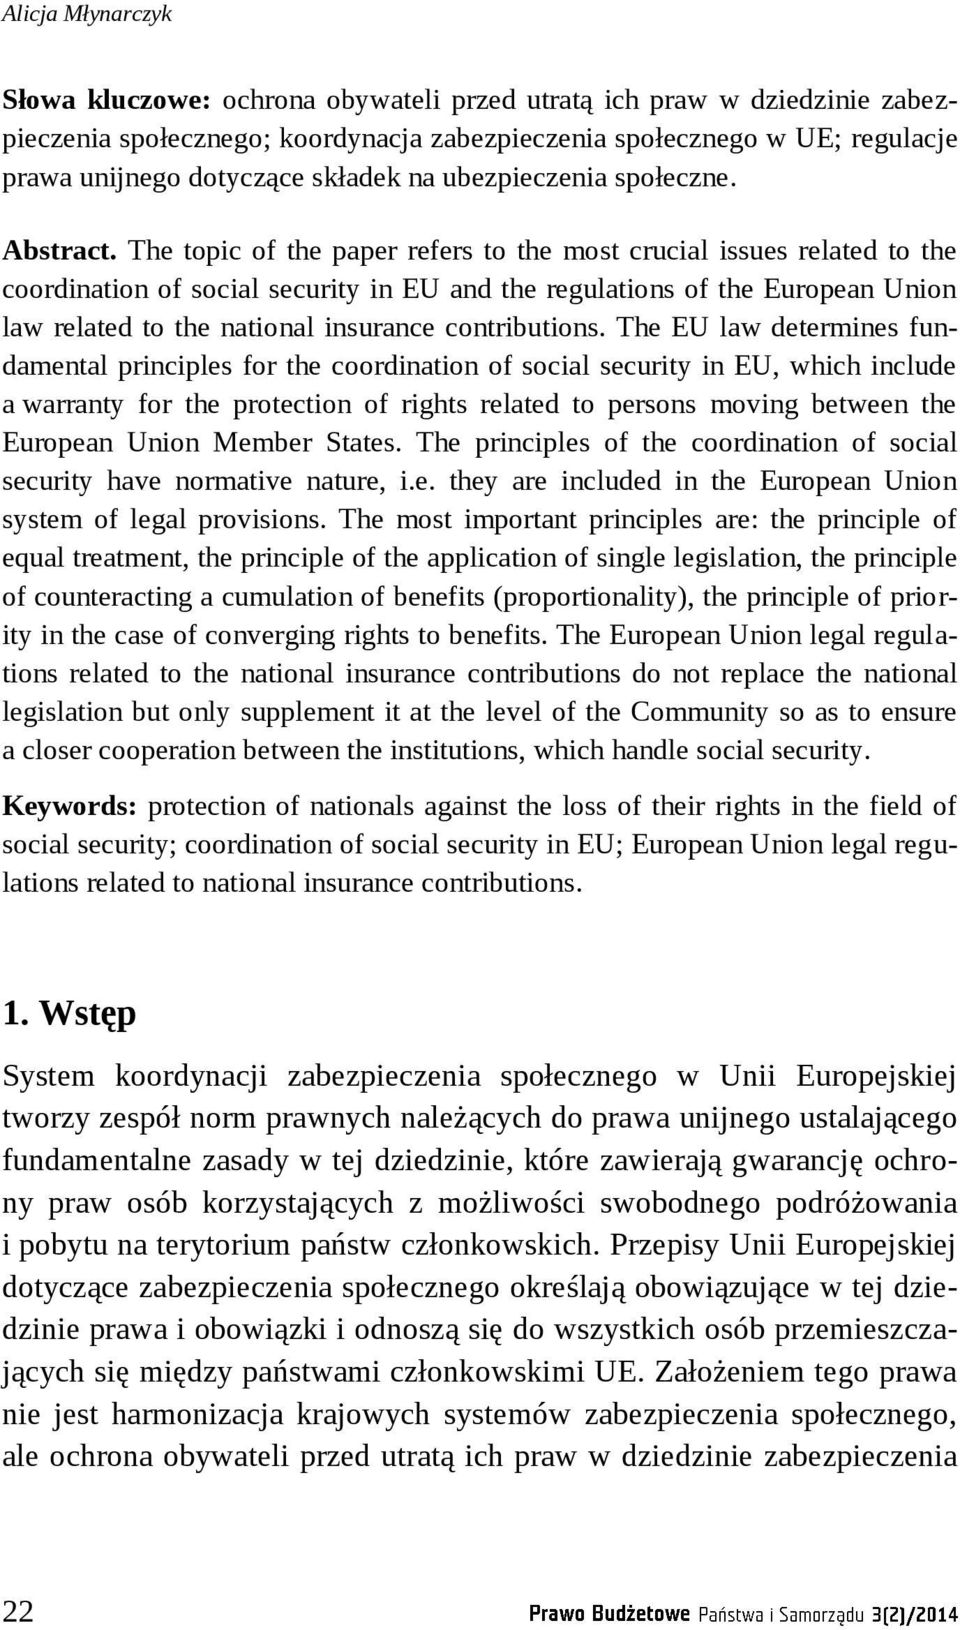 The topic of the paper refers to the most crucial issues related to the coordination of social security in EU and the regulations of the European Union law related to the national insurance